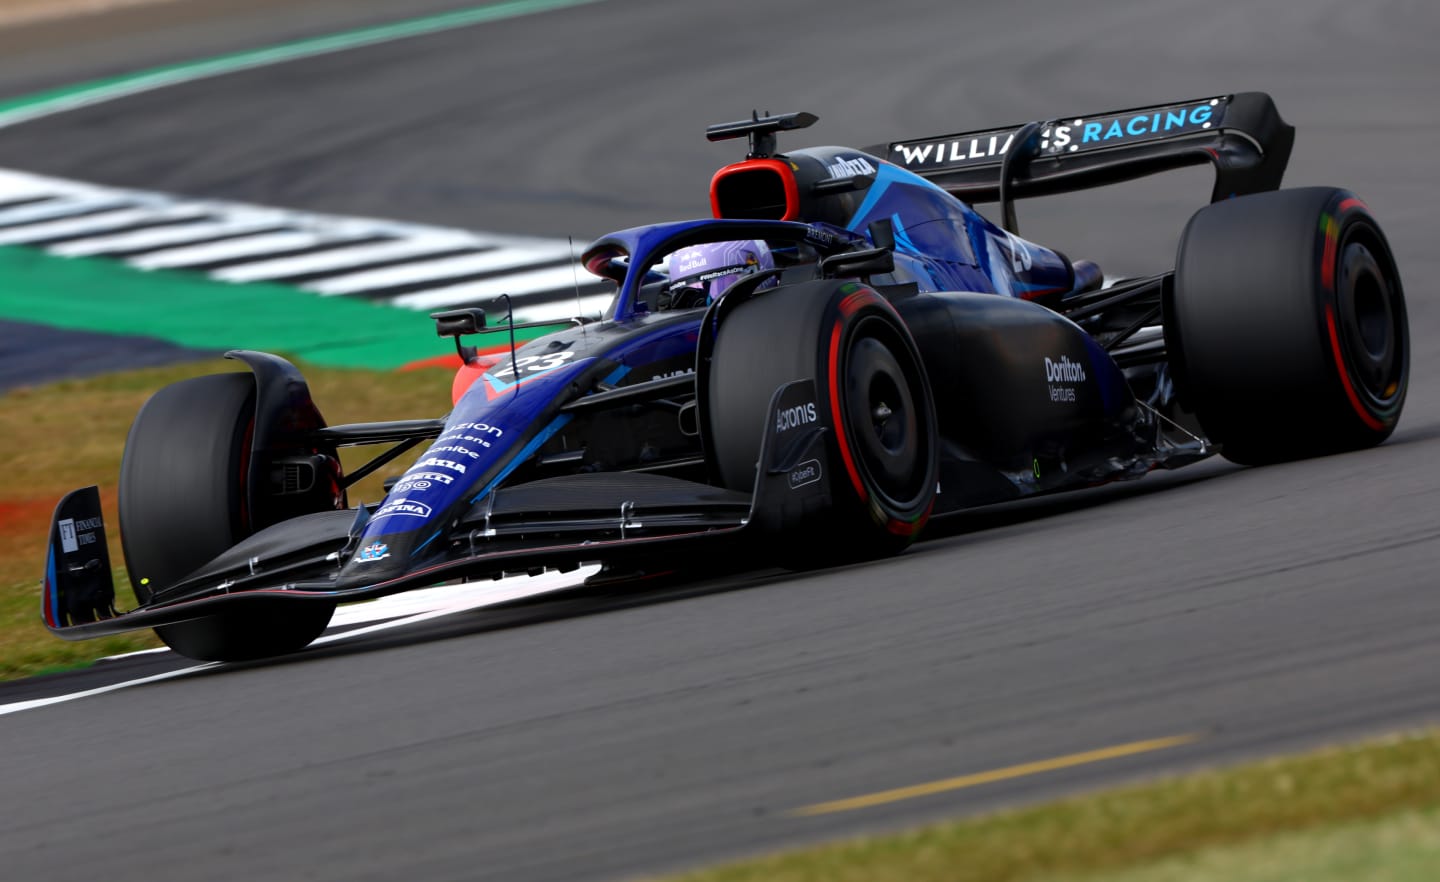 NORTHAMPTON, ENGLAND - JULY 01: Alexander Albon of Thailand driving the (23) Williams FW44 Mercedes on track during practice ahead of the F1 Grand Prix of Great Britain at Silverstone on July 01, 2022 in Northampton, England. (Photo by Mark Thompson/Getty Images)